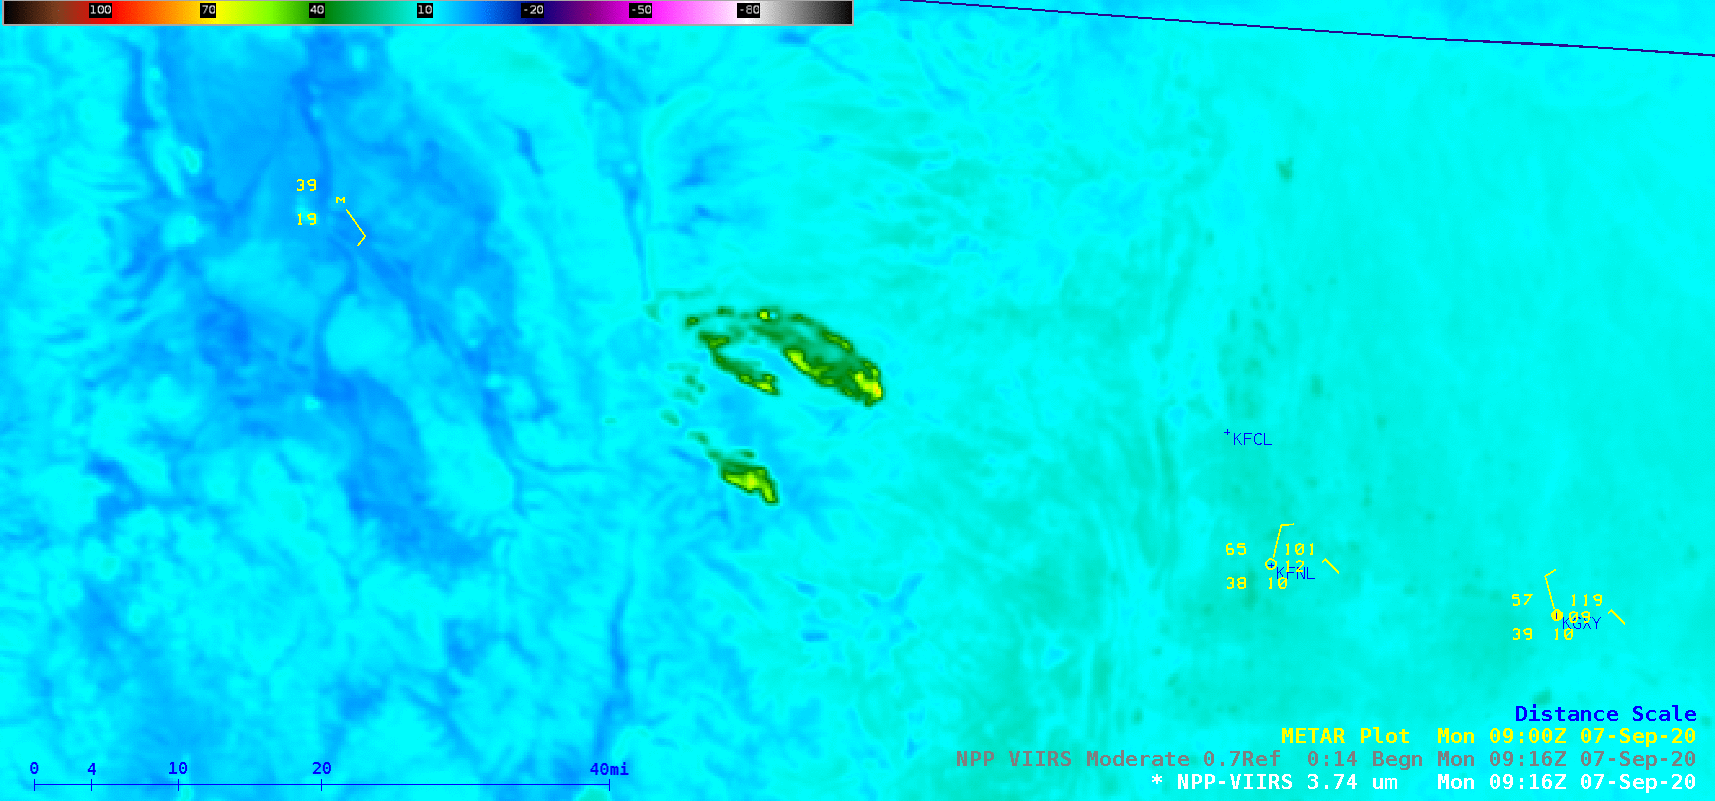 Suomi NPP VIIRS Shortwave Infrared (3.74 µm) and Day/Night Band (0.7 µm) images, with plots of METAR surface reports [click to enlarge]